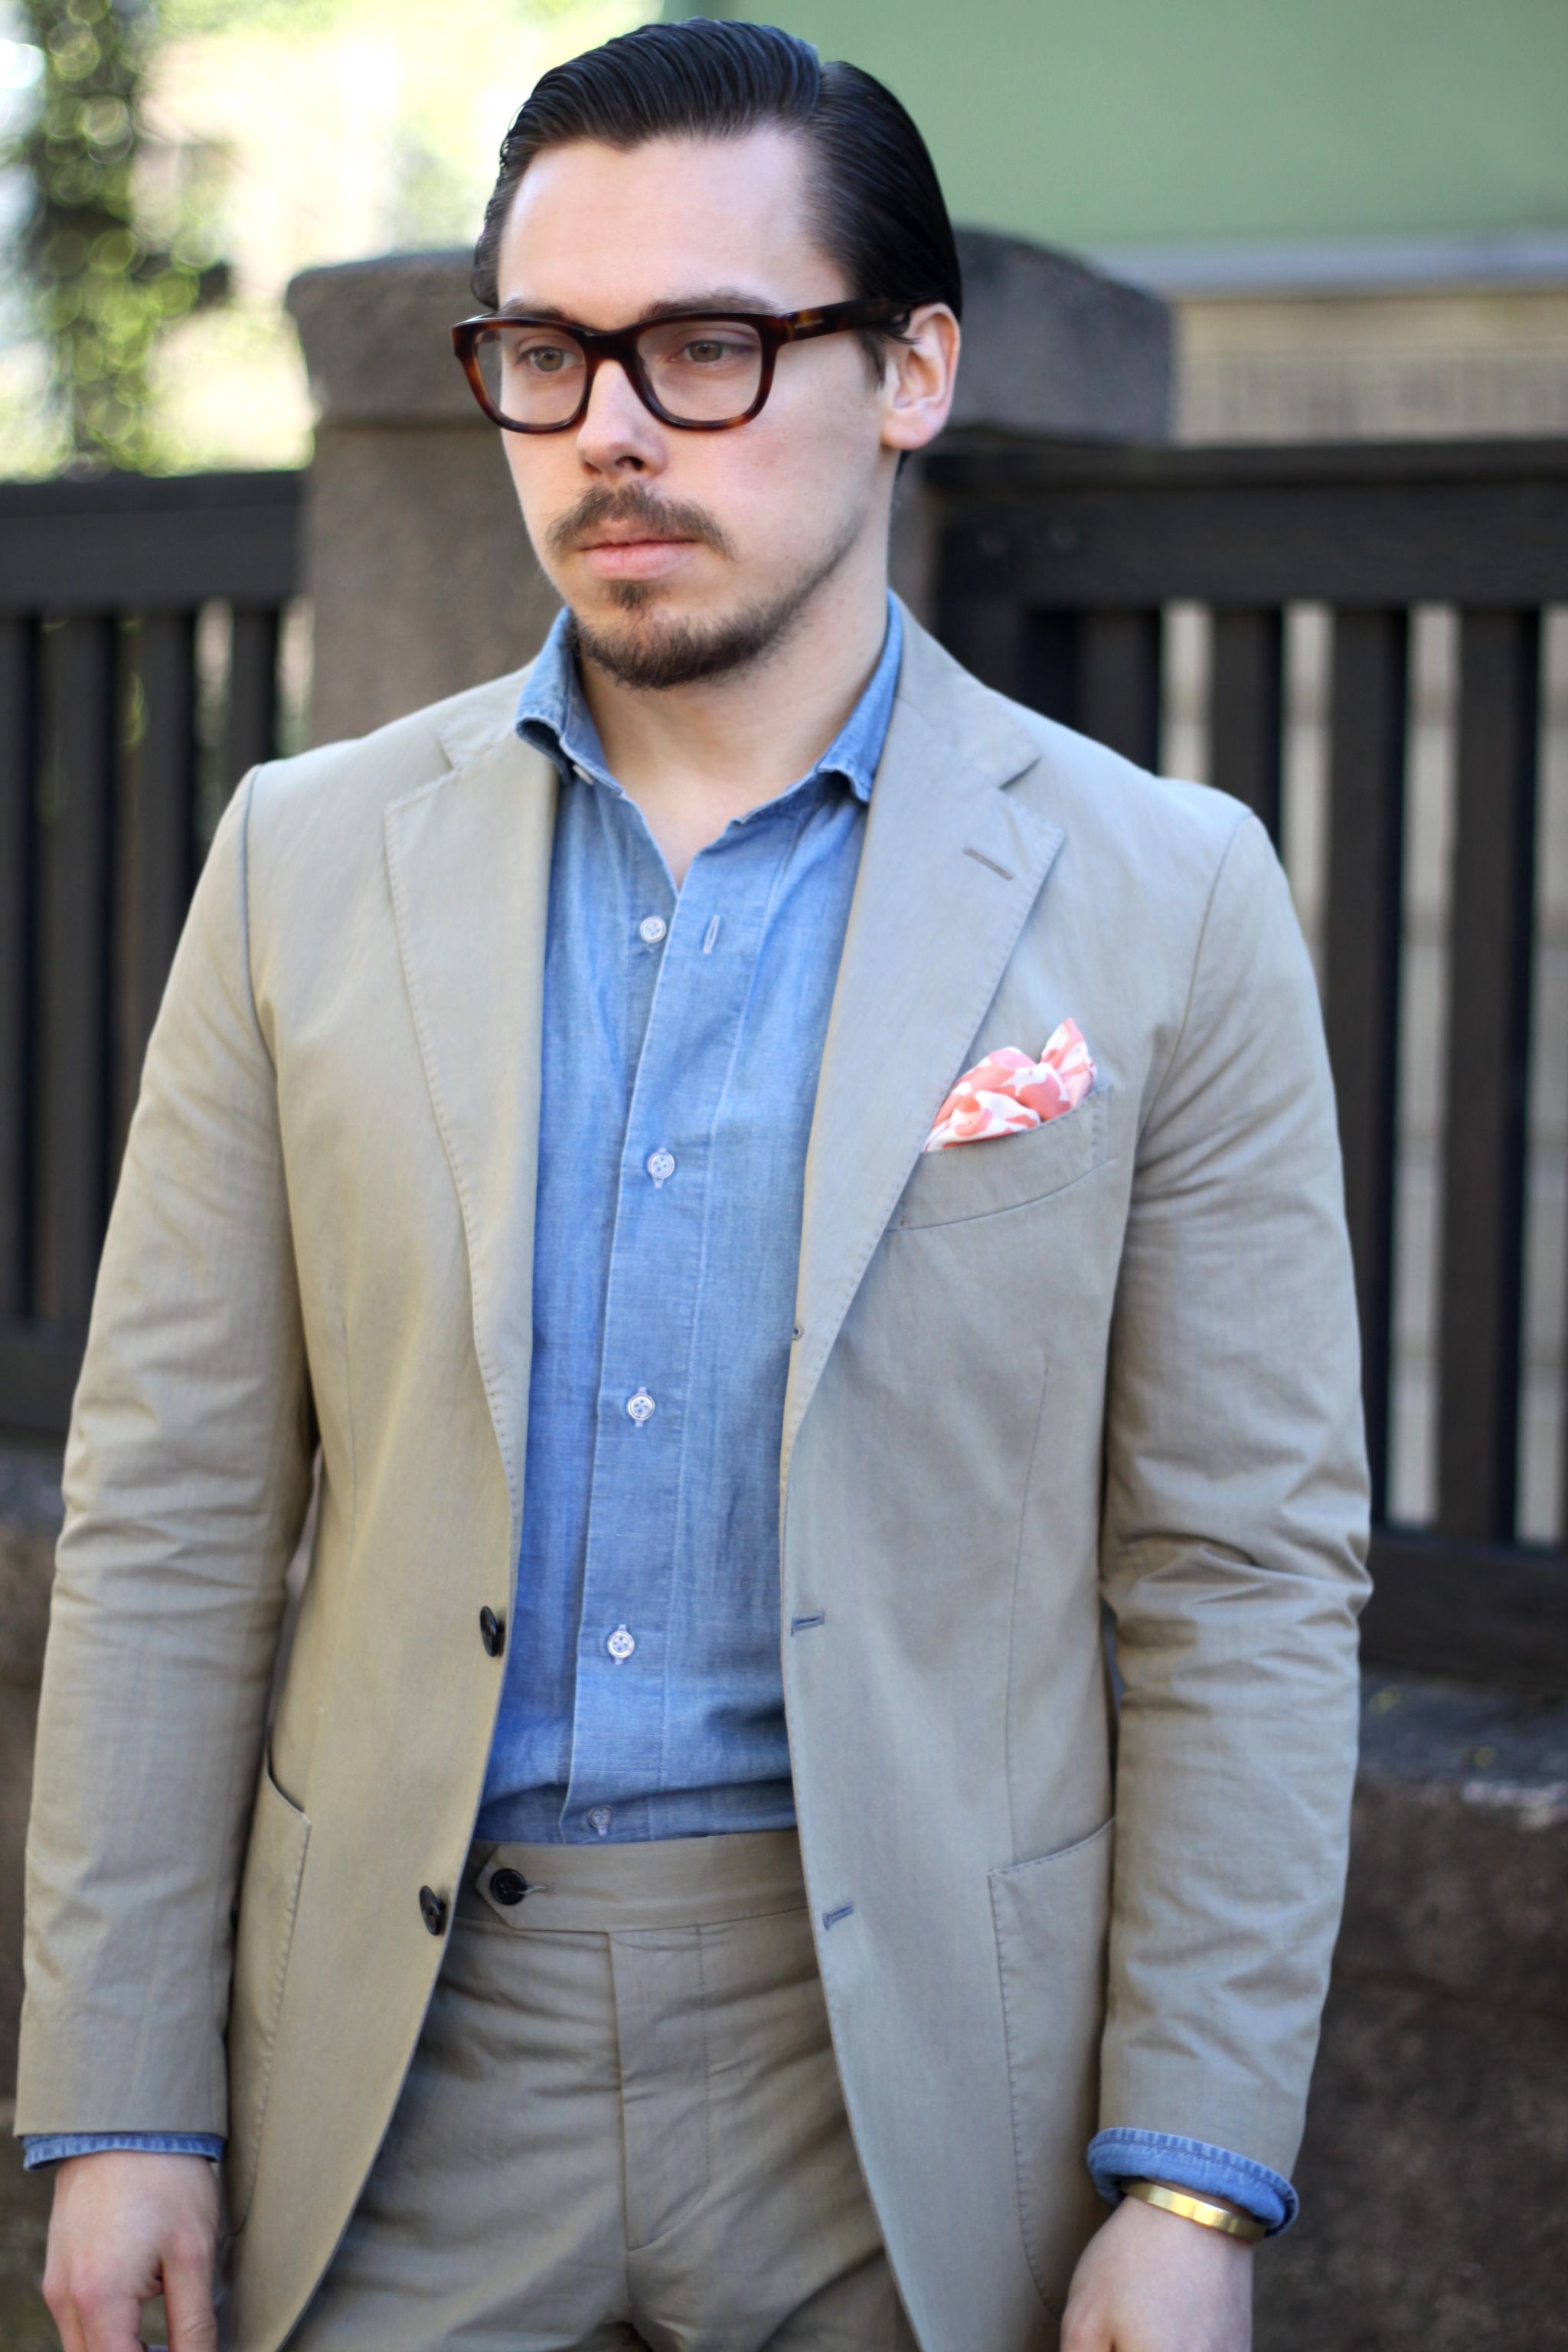 Casual suit without tie - green cotton suit and denim shirt is a perfect combination for summer